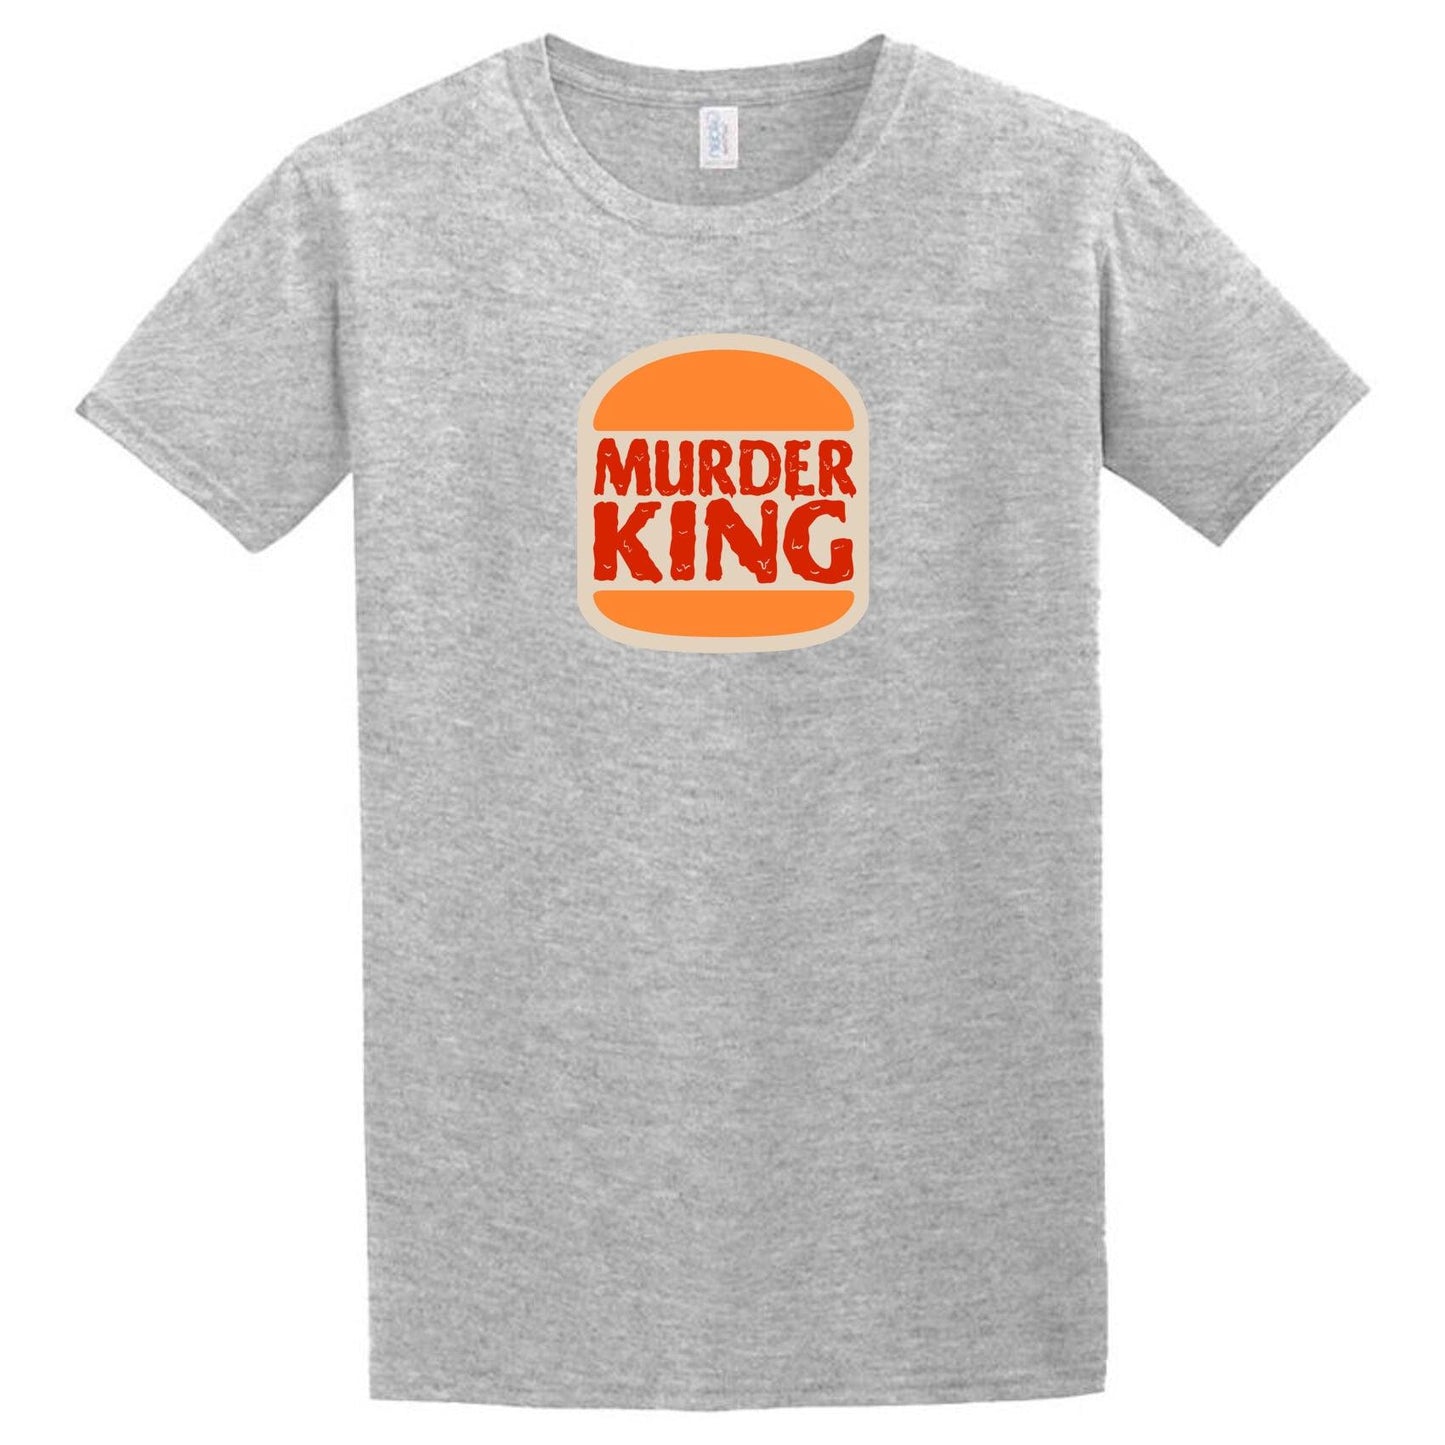 A Whopper-sized gray Murder King T-shirt with Fast Food Humor that says Murder King by Twisted Gifts.